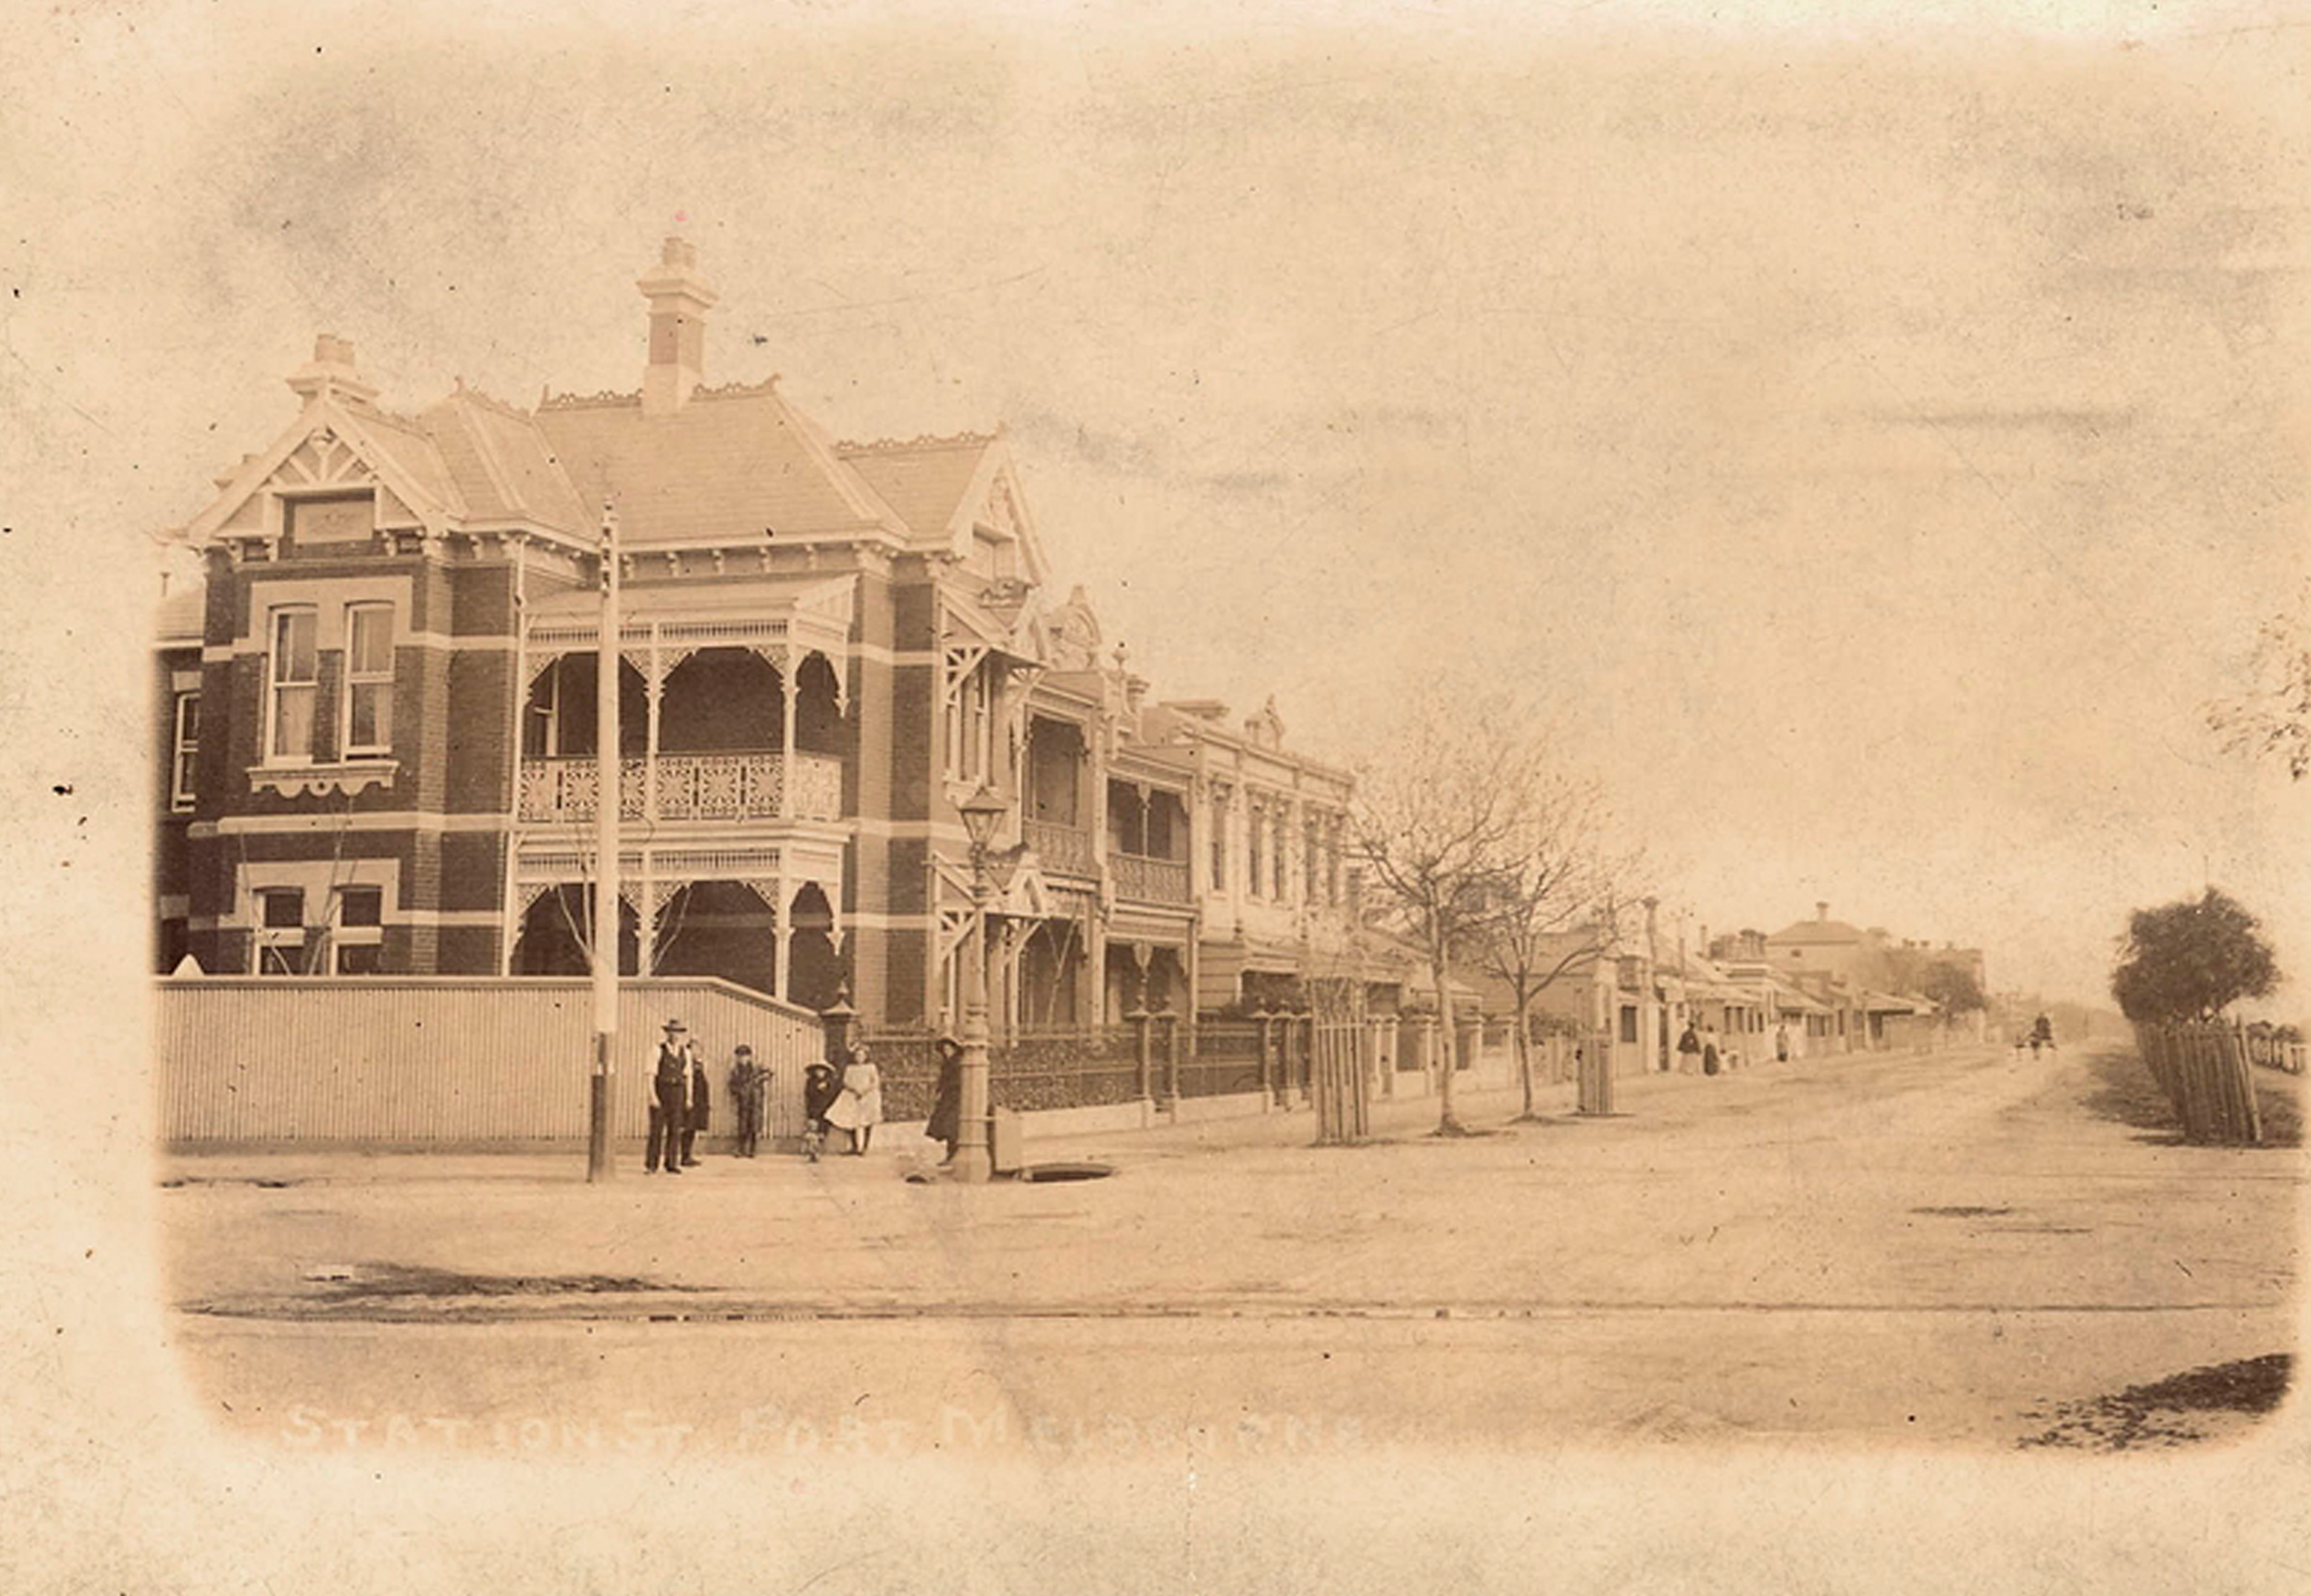 Station Street,  2016 and Station Street, 1907